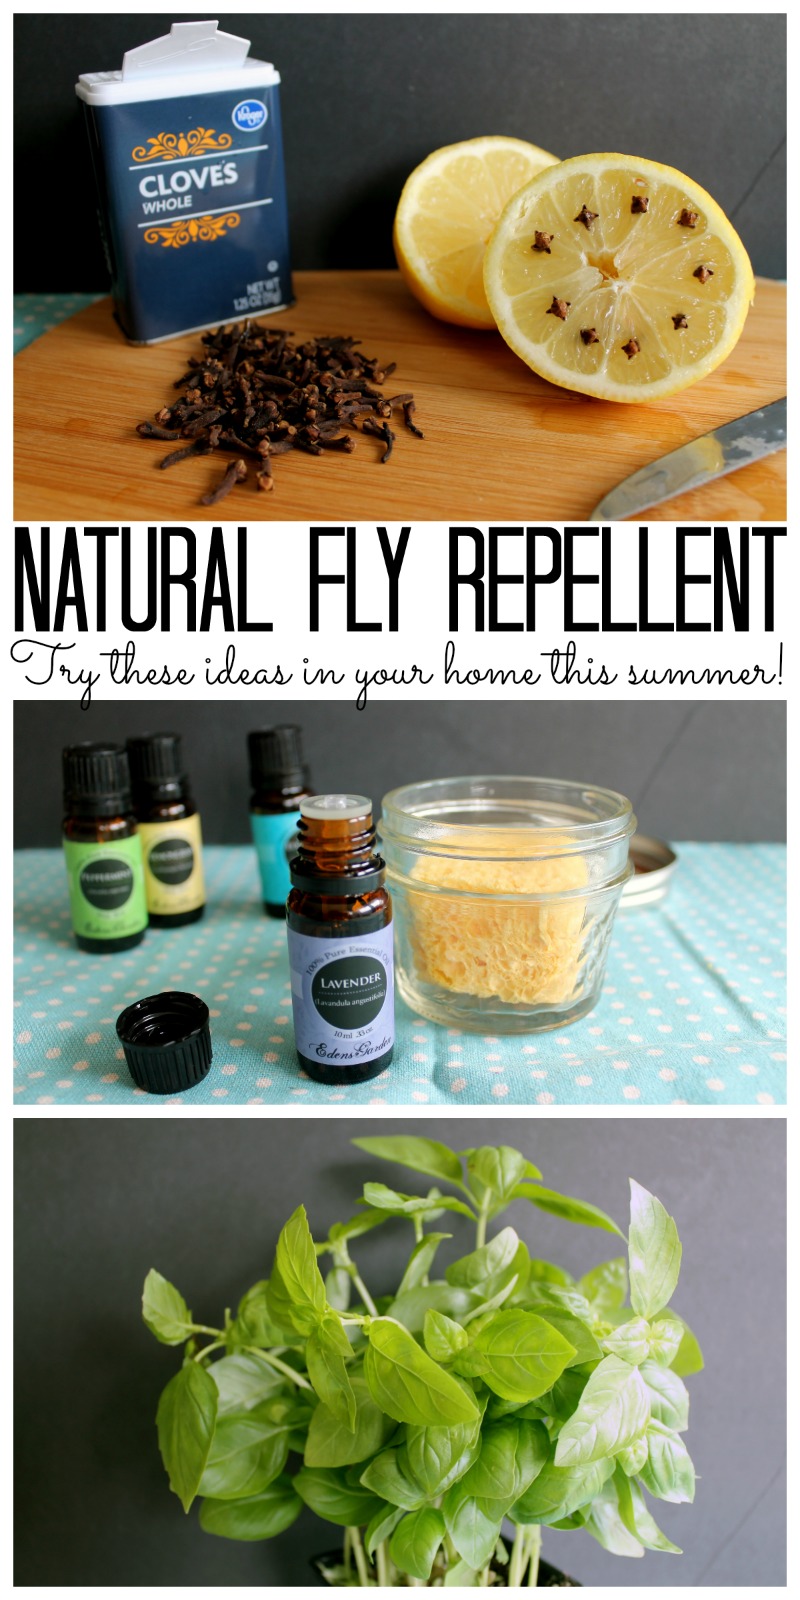 https://www.thecountrychiccottage.net/wp-content/uploads/2017/04/natural-fly-repellent-ideas-for-your-home.jpg